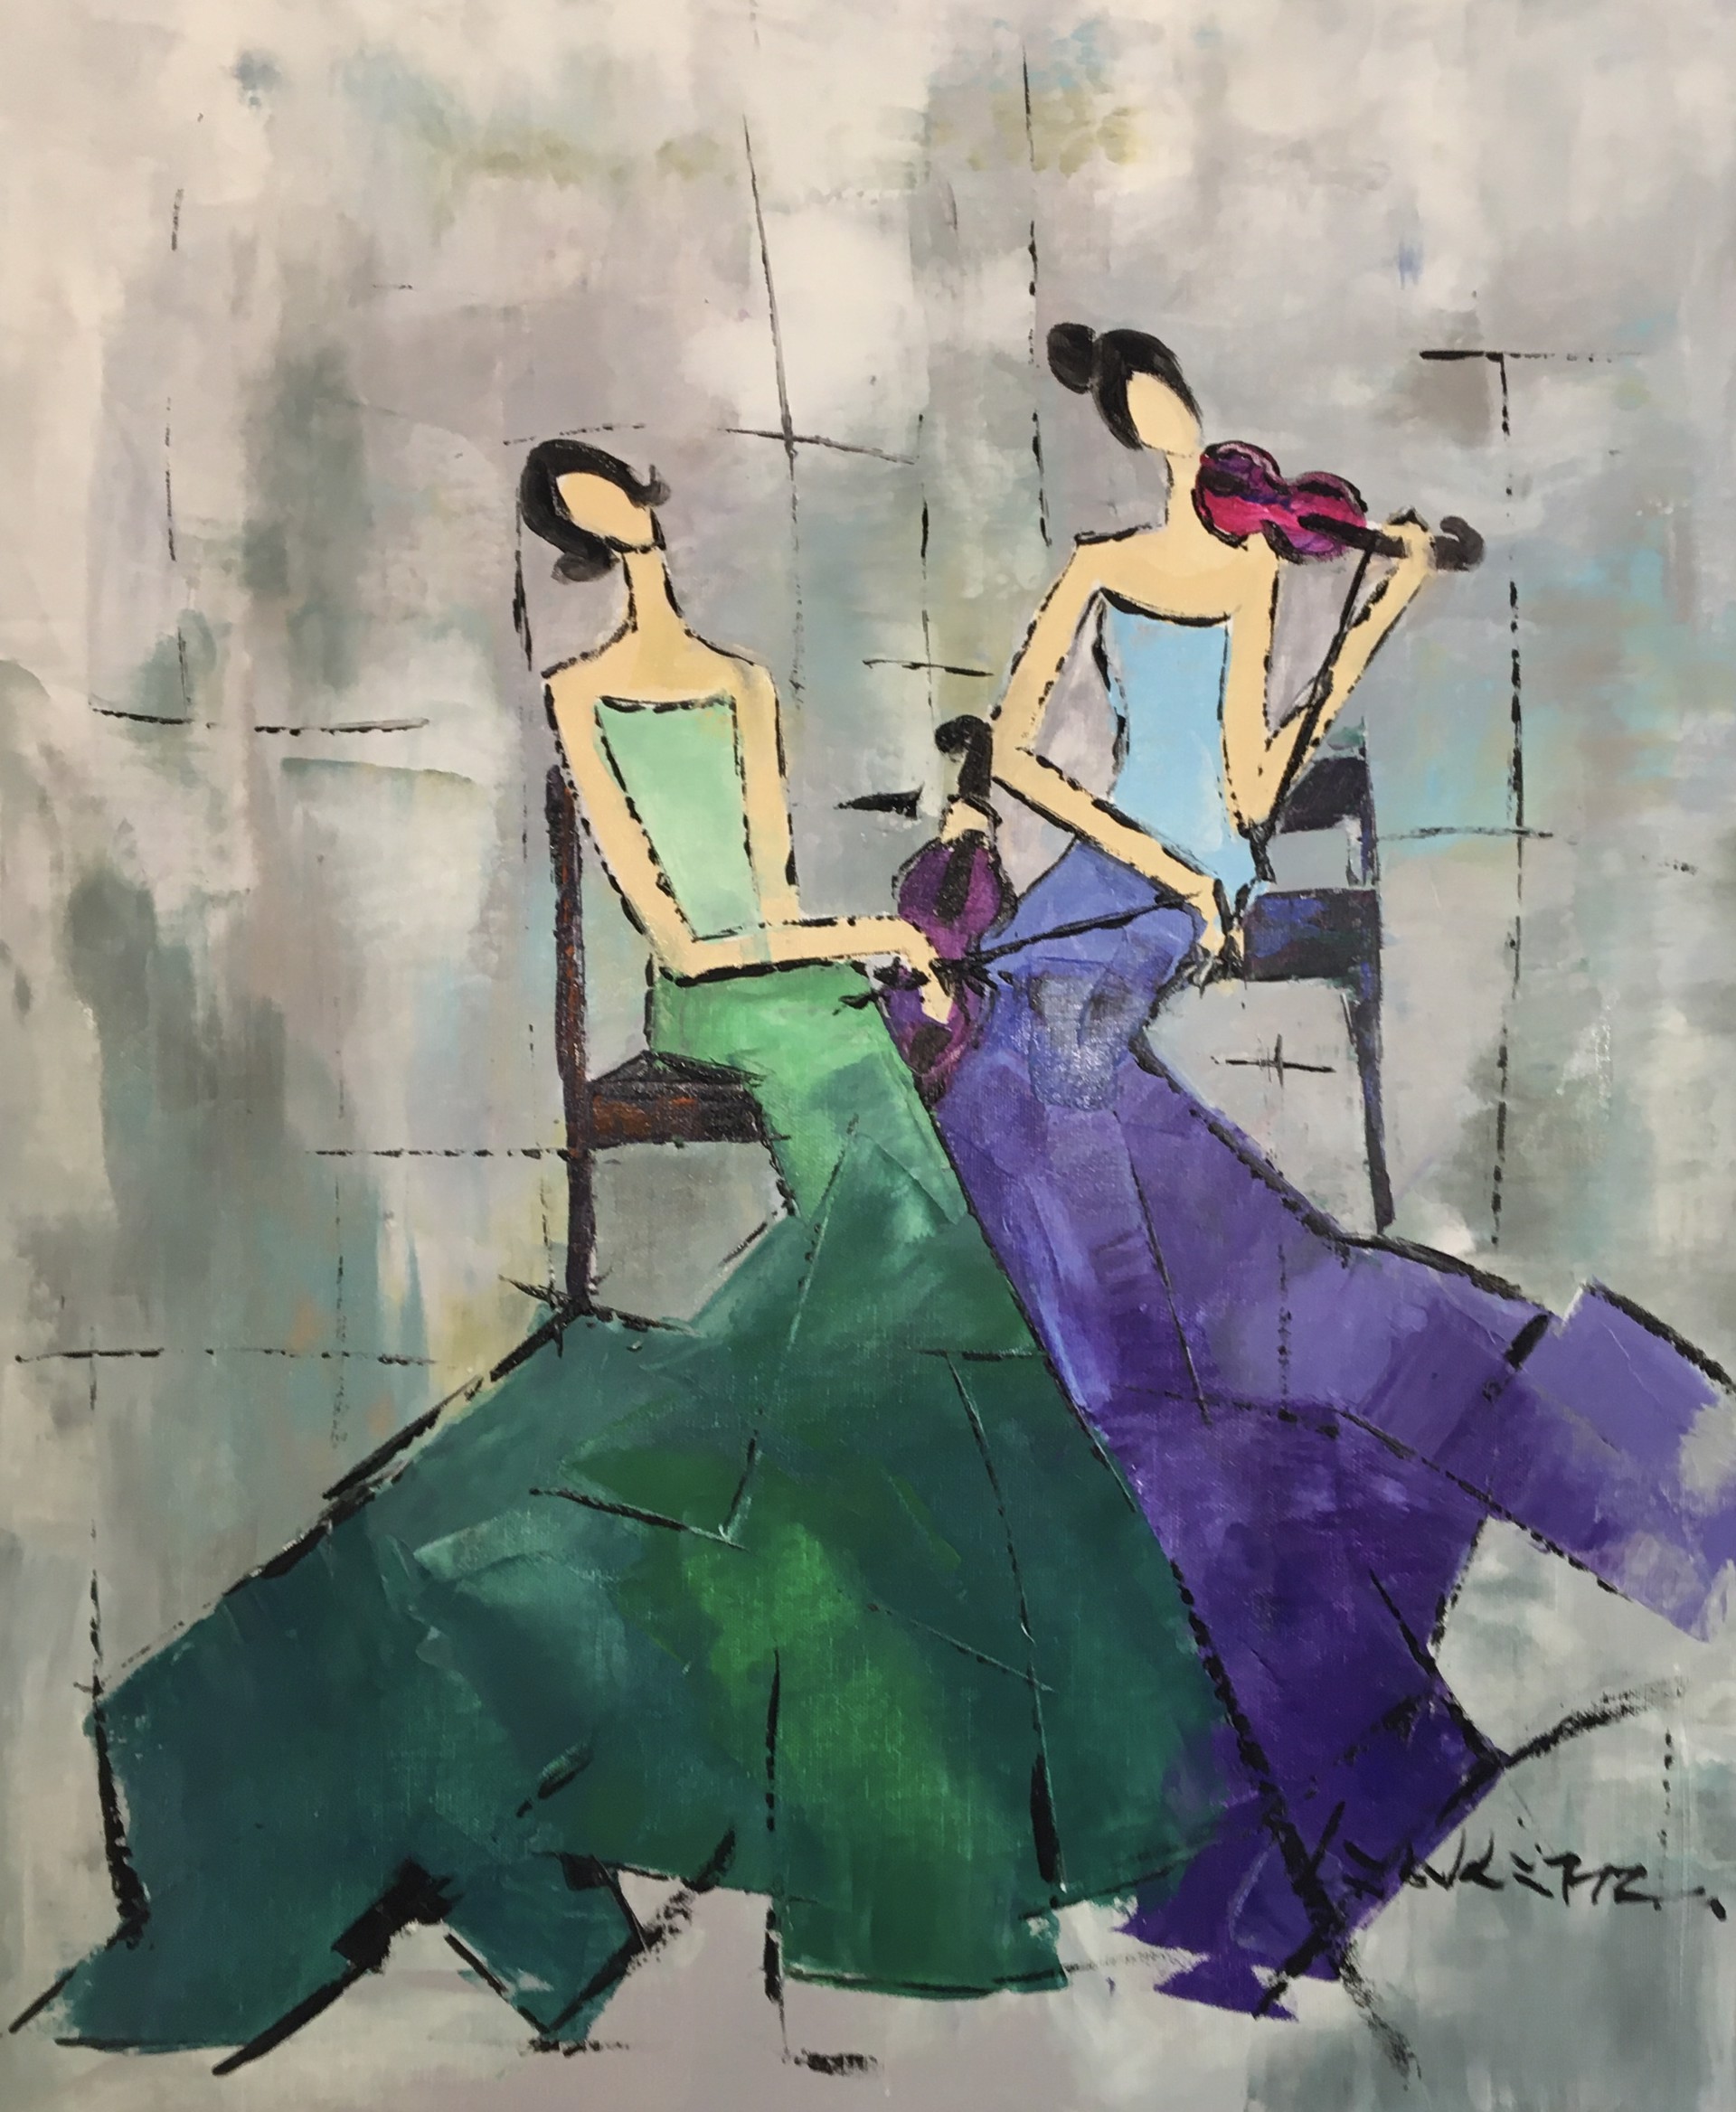 VIOLINISTS IN GREEN AND PURPLE by LIA KIM